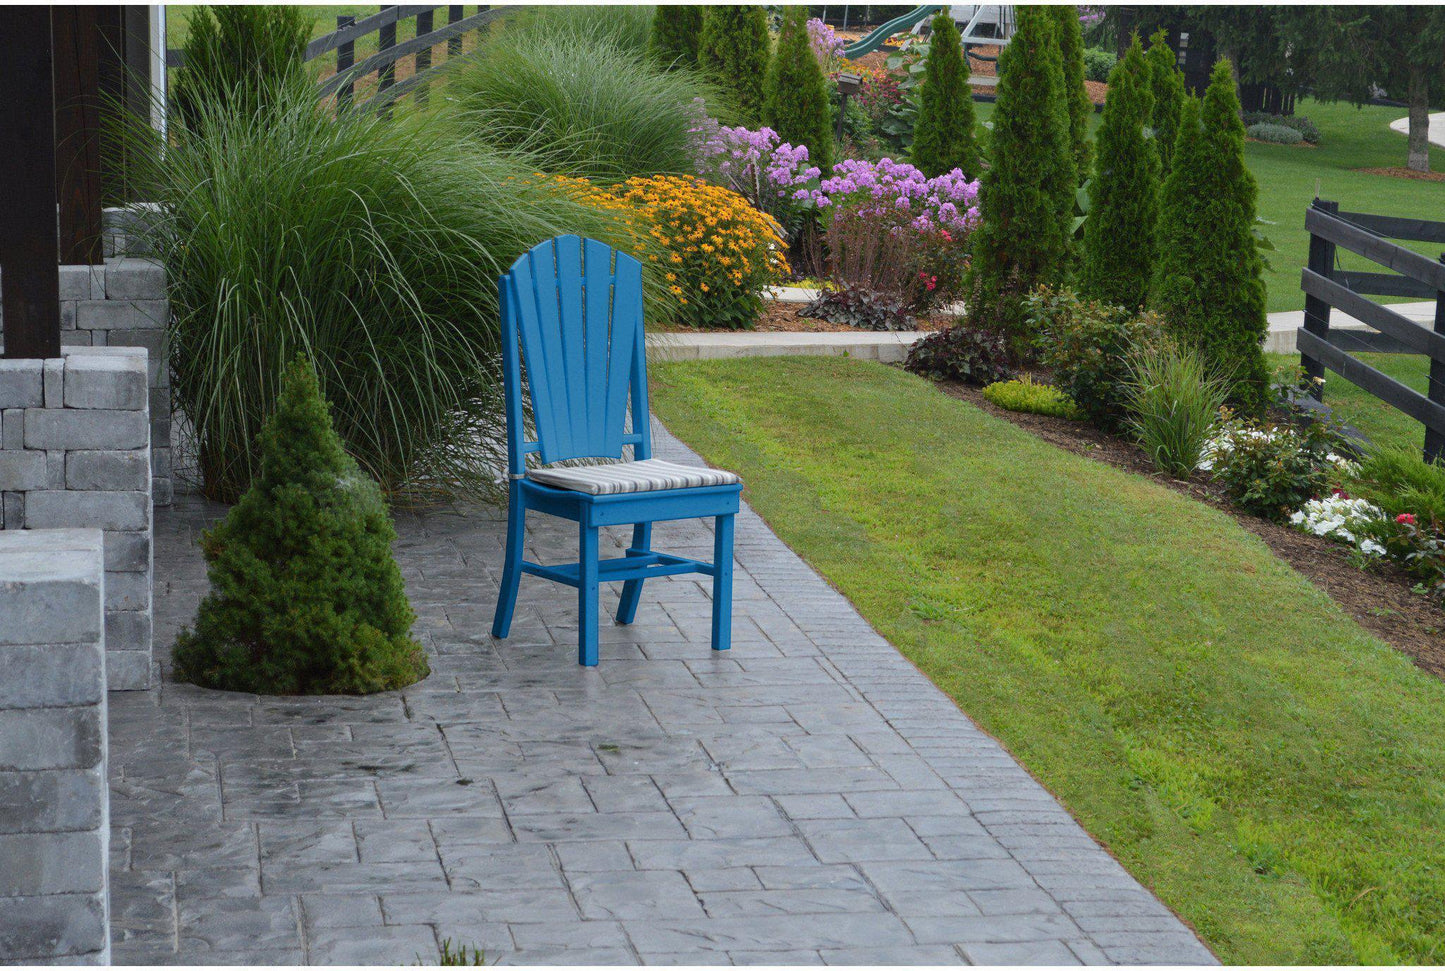 A&L Furniture Company Recycled Plastic Adirondack Dining Chair - Blue